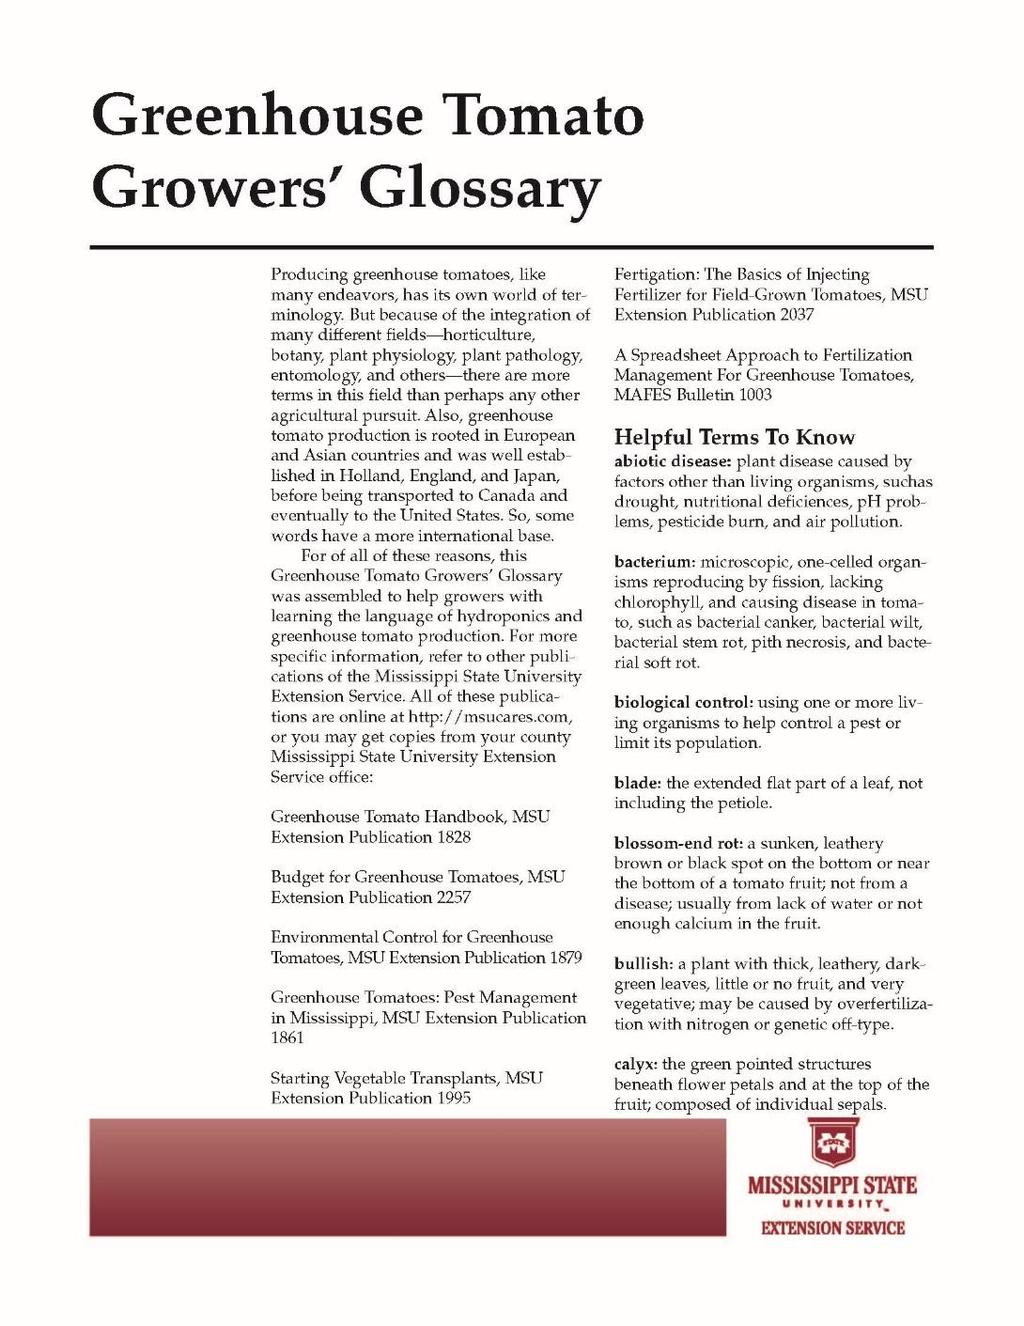 See the Greenhouse Tomato Growers Glossary Learn the terminology